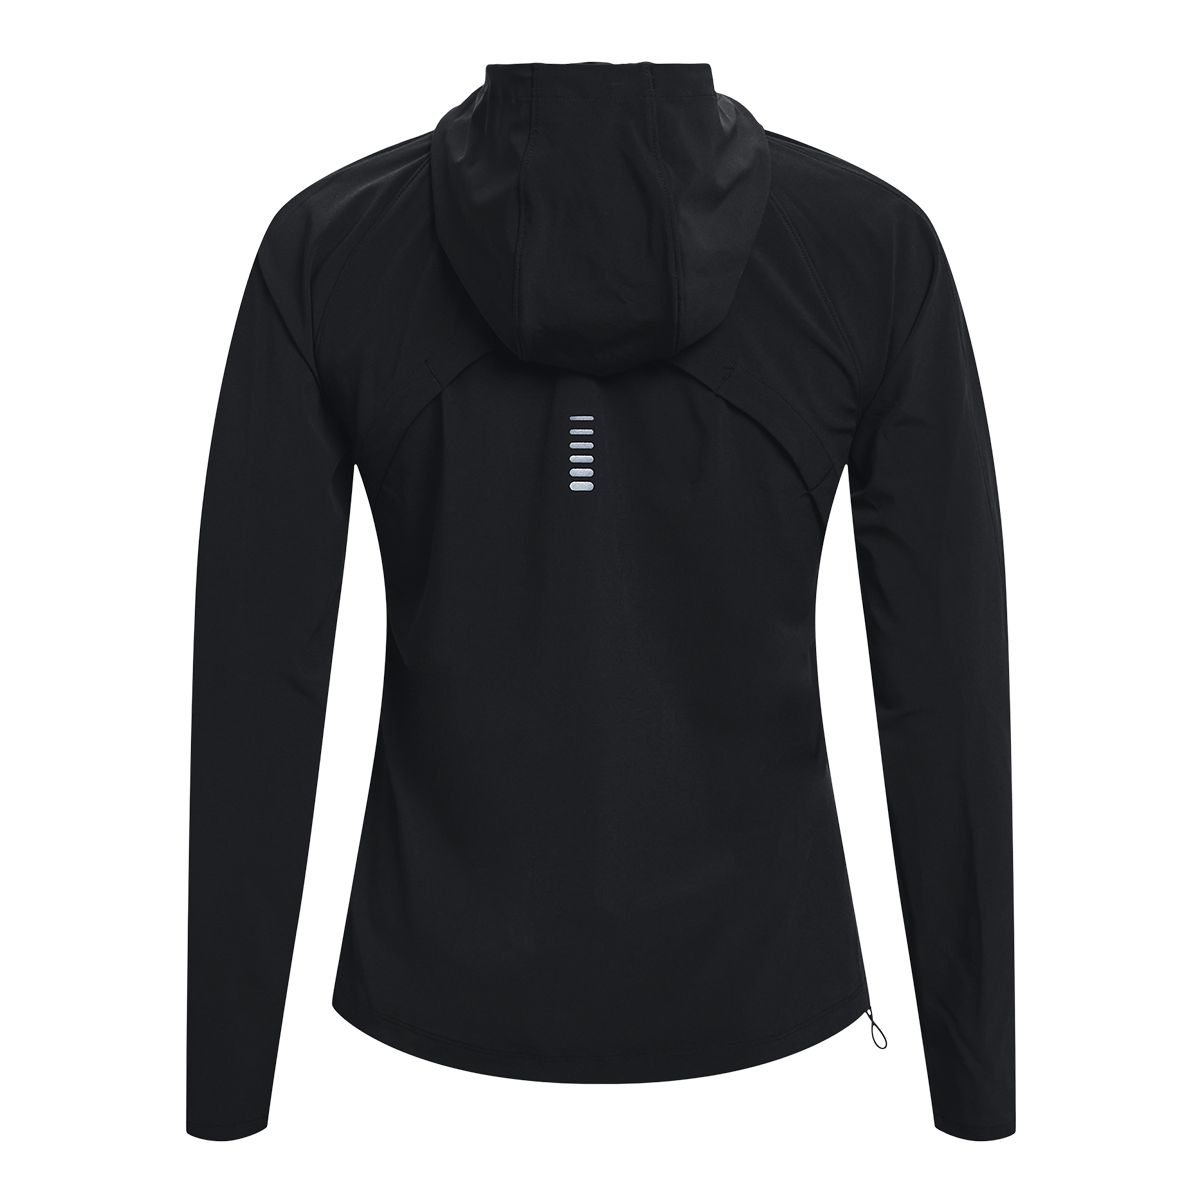 Under Armour Women's Qualifier OutRun The Storm Jacket